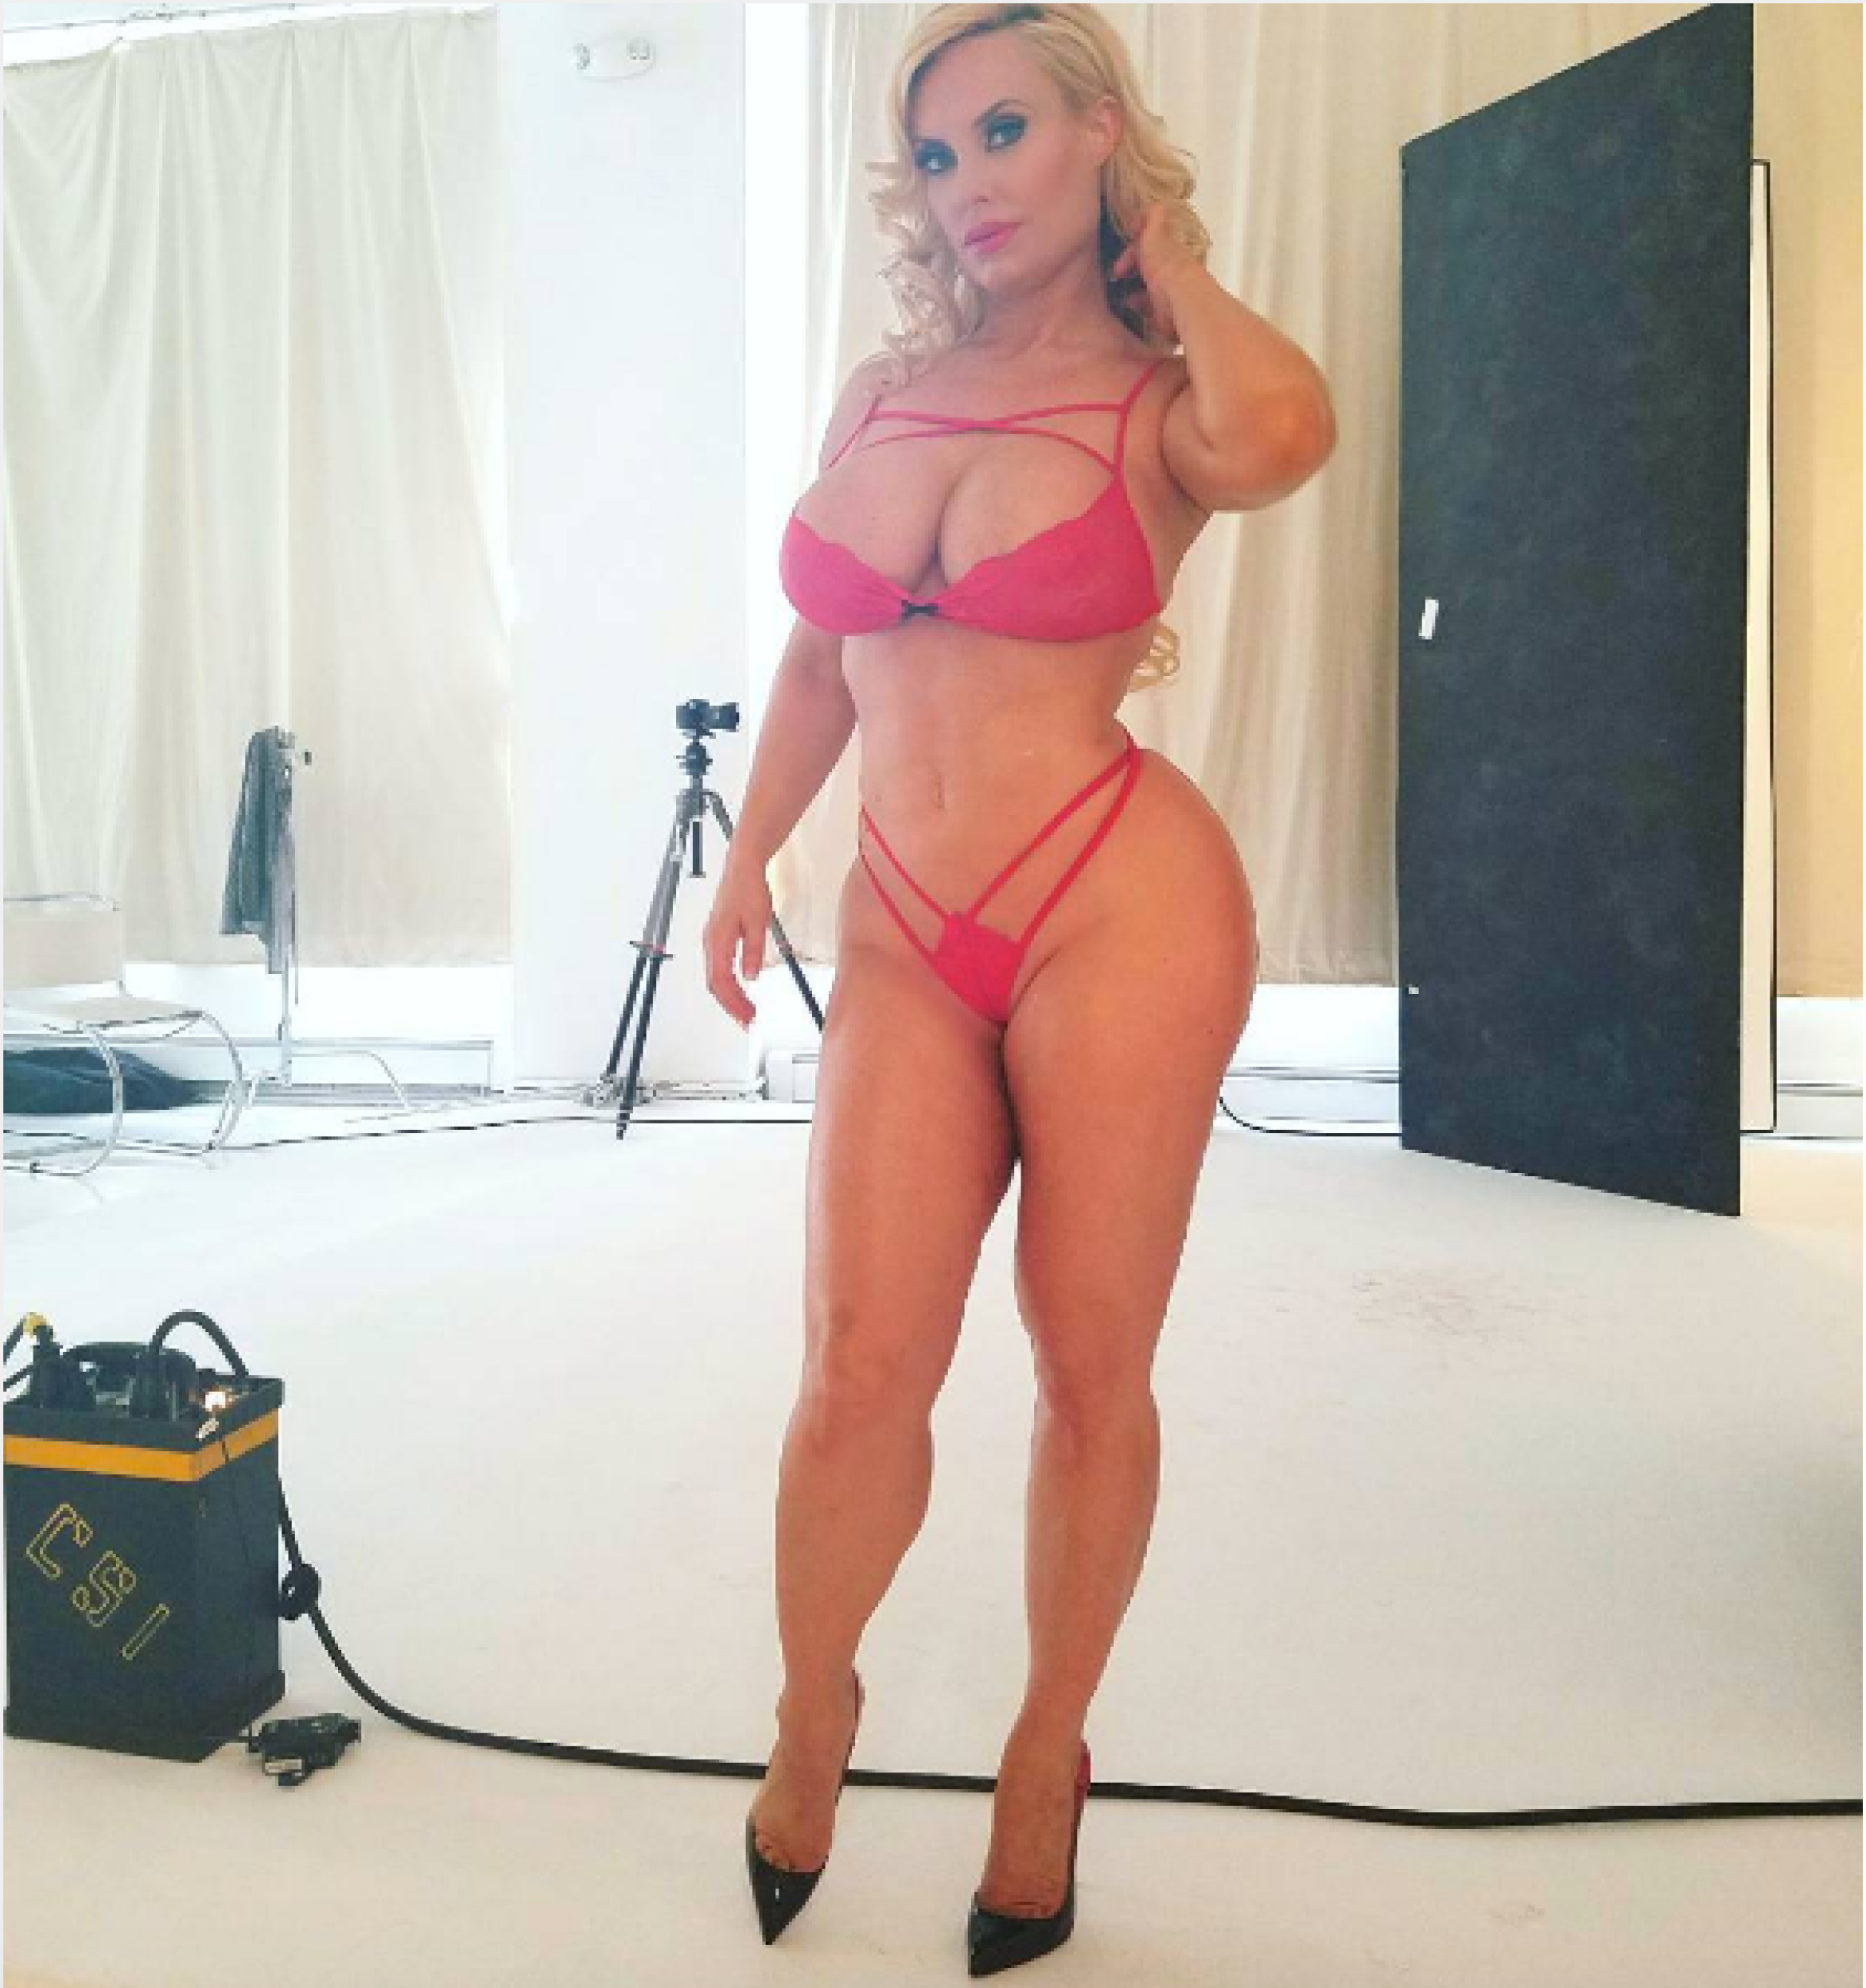 Coco Austin Nude Photos With Other Women